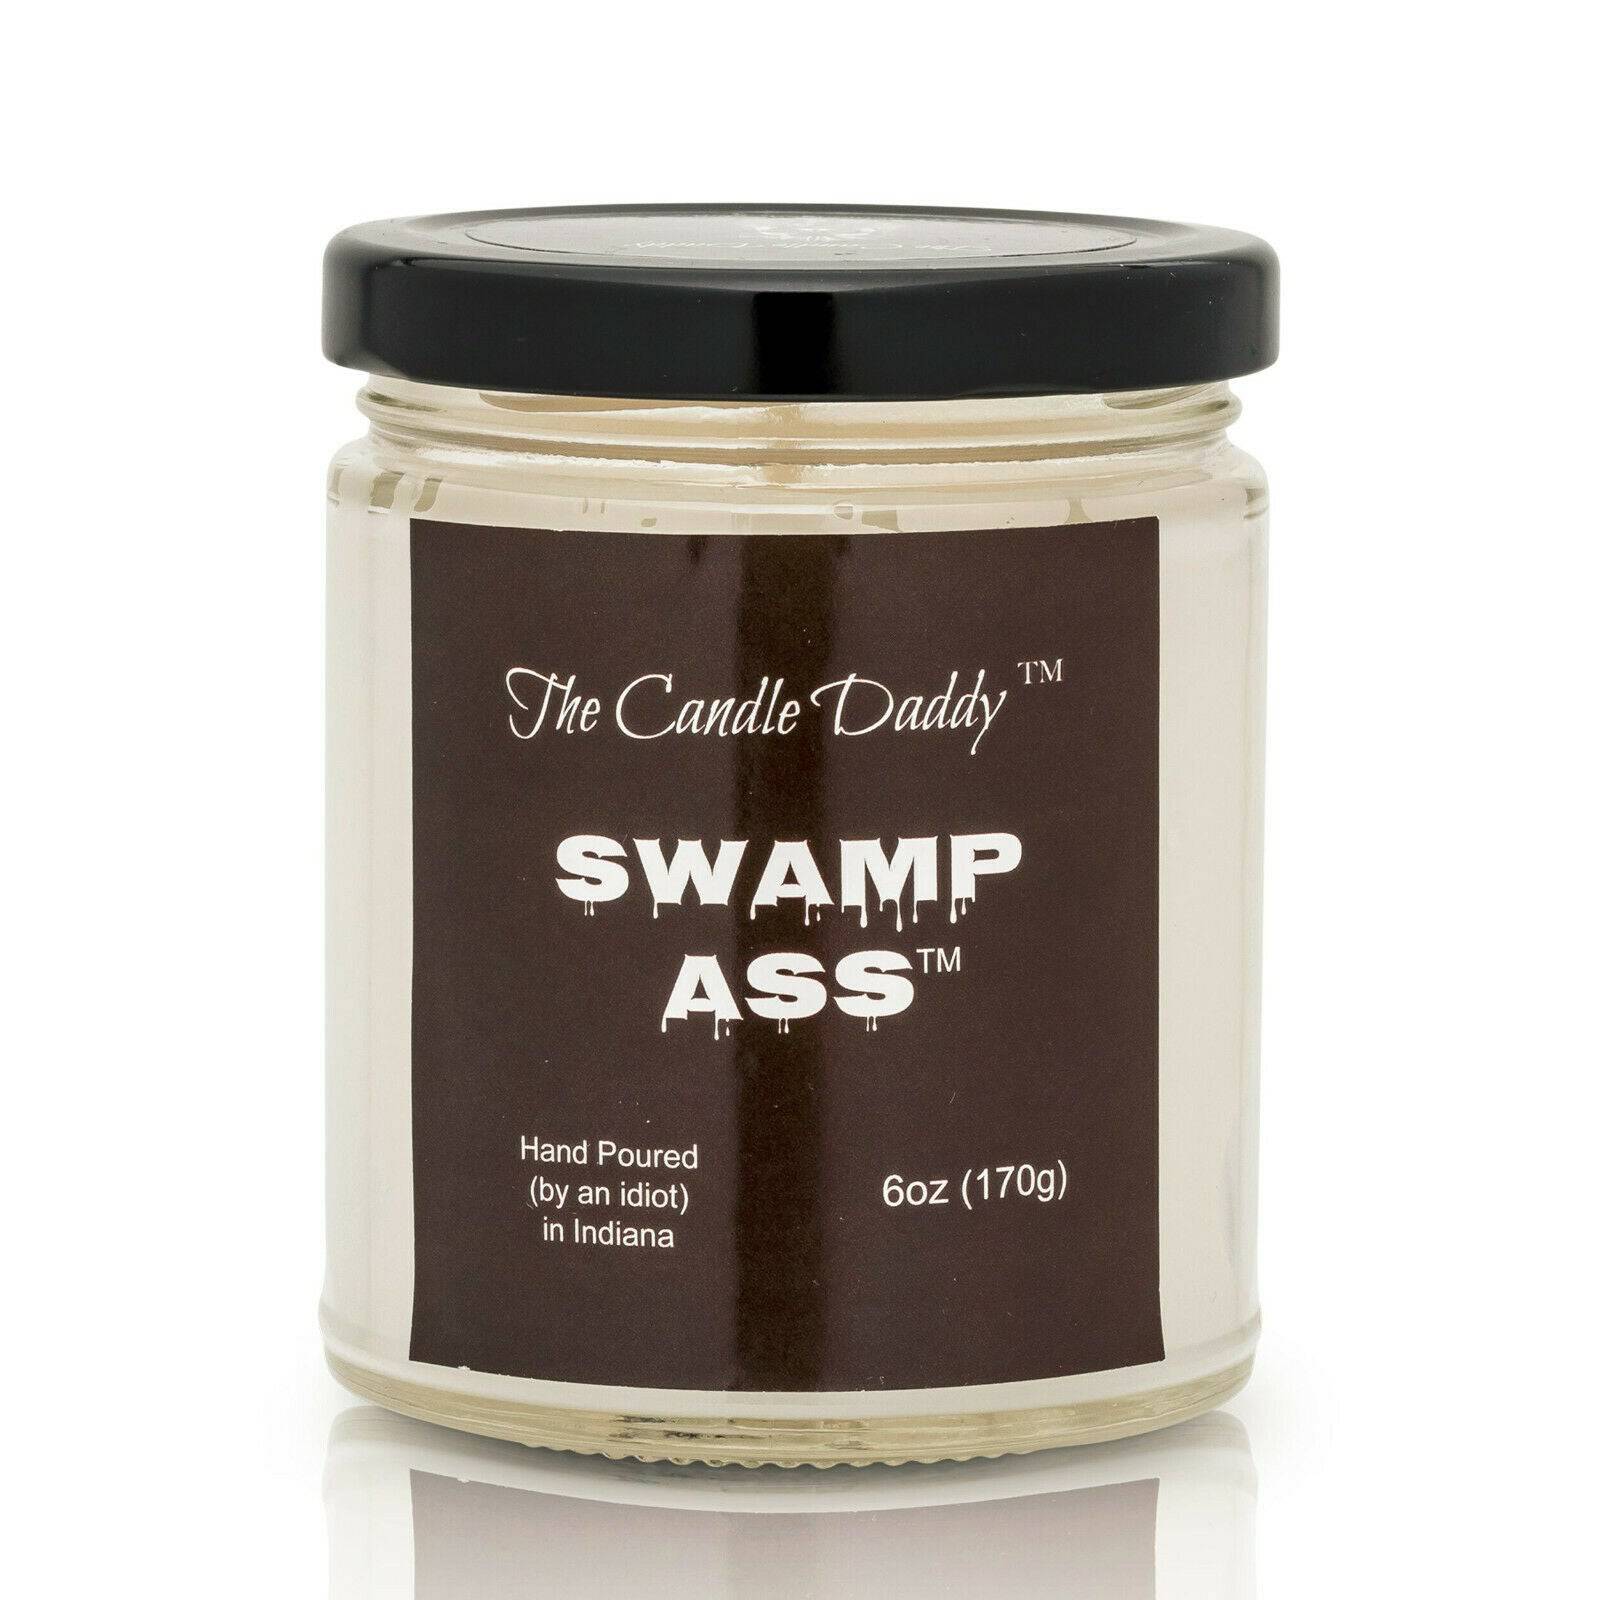 Swamp Ass Very Horrible Smelling Candle Practica